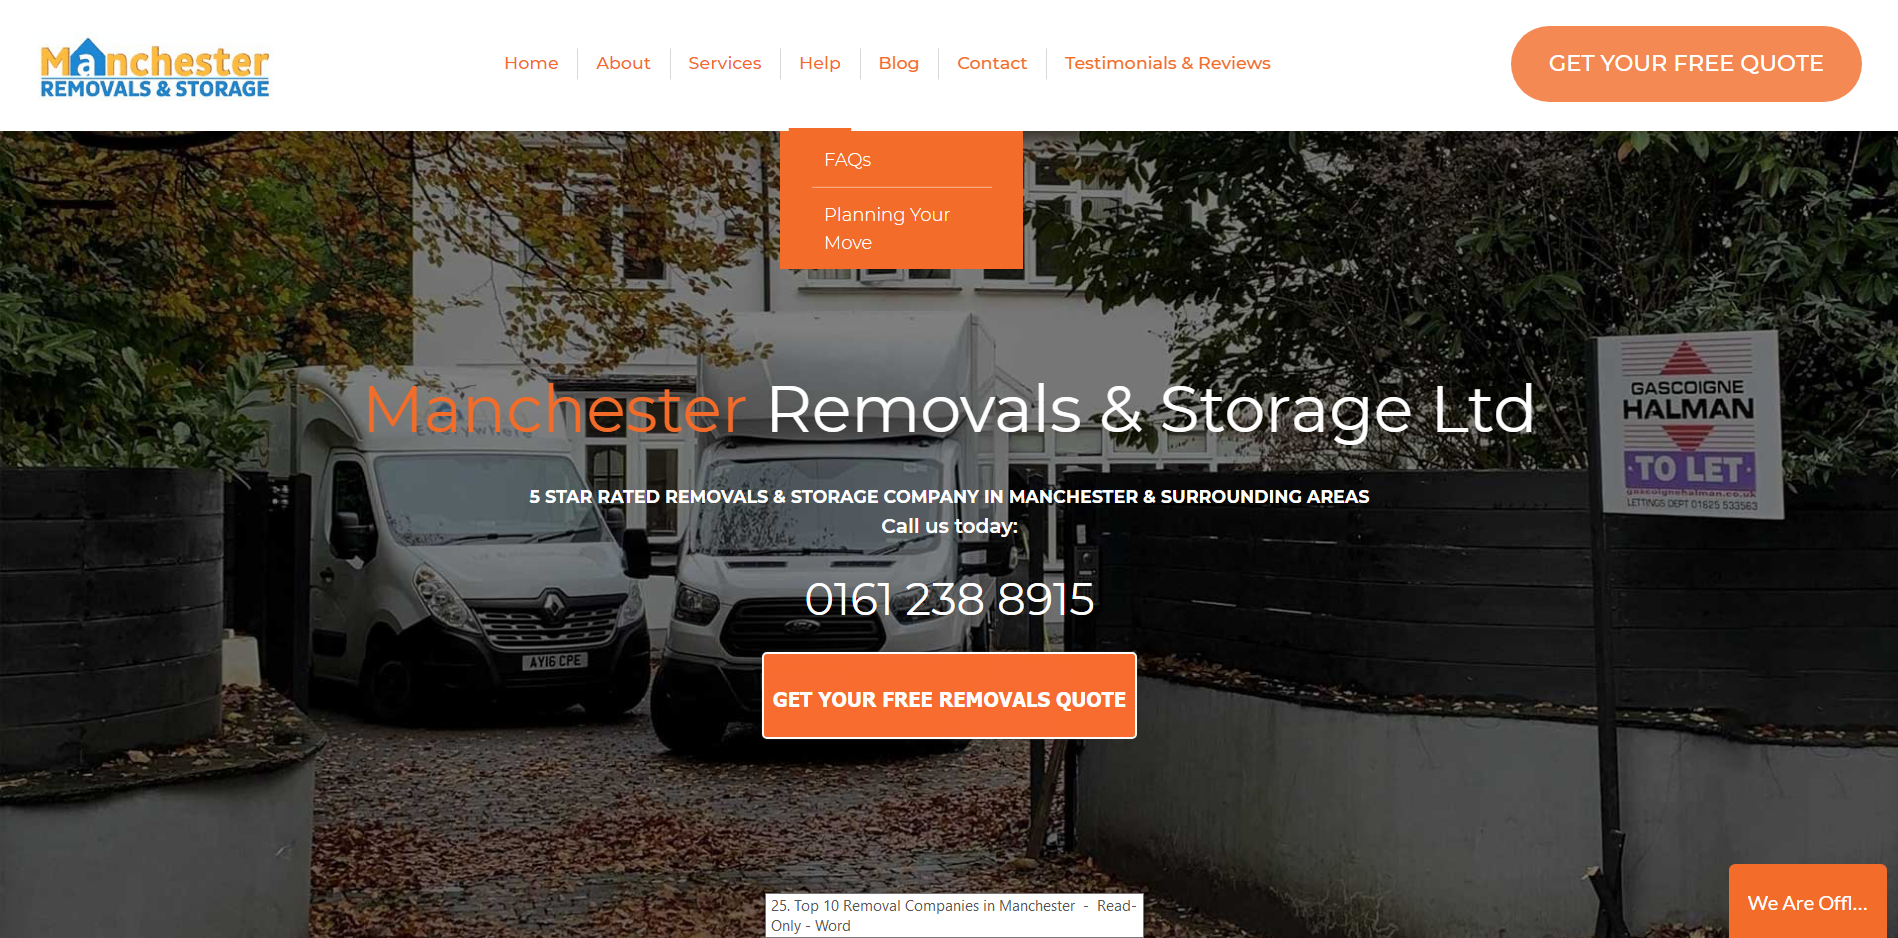 Manchester Removals